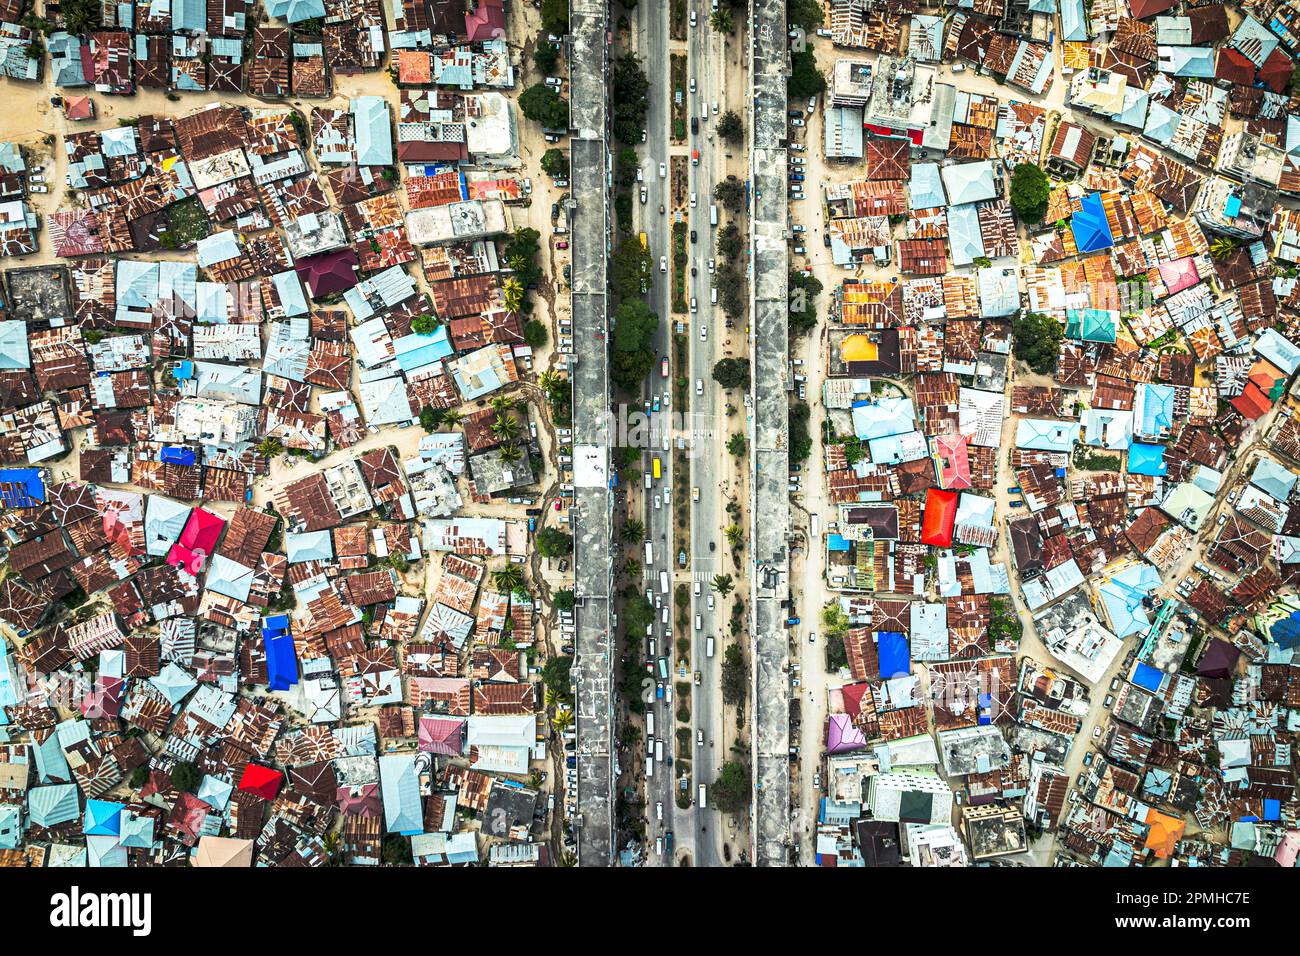 Overhead view of highway crossing the crowded city of Stone Town, Zanzibar, Tanzania, East Africa, Africa Stock Photo